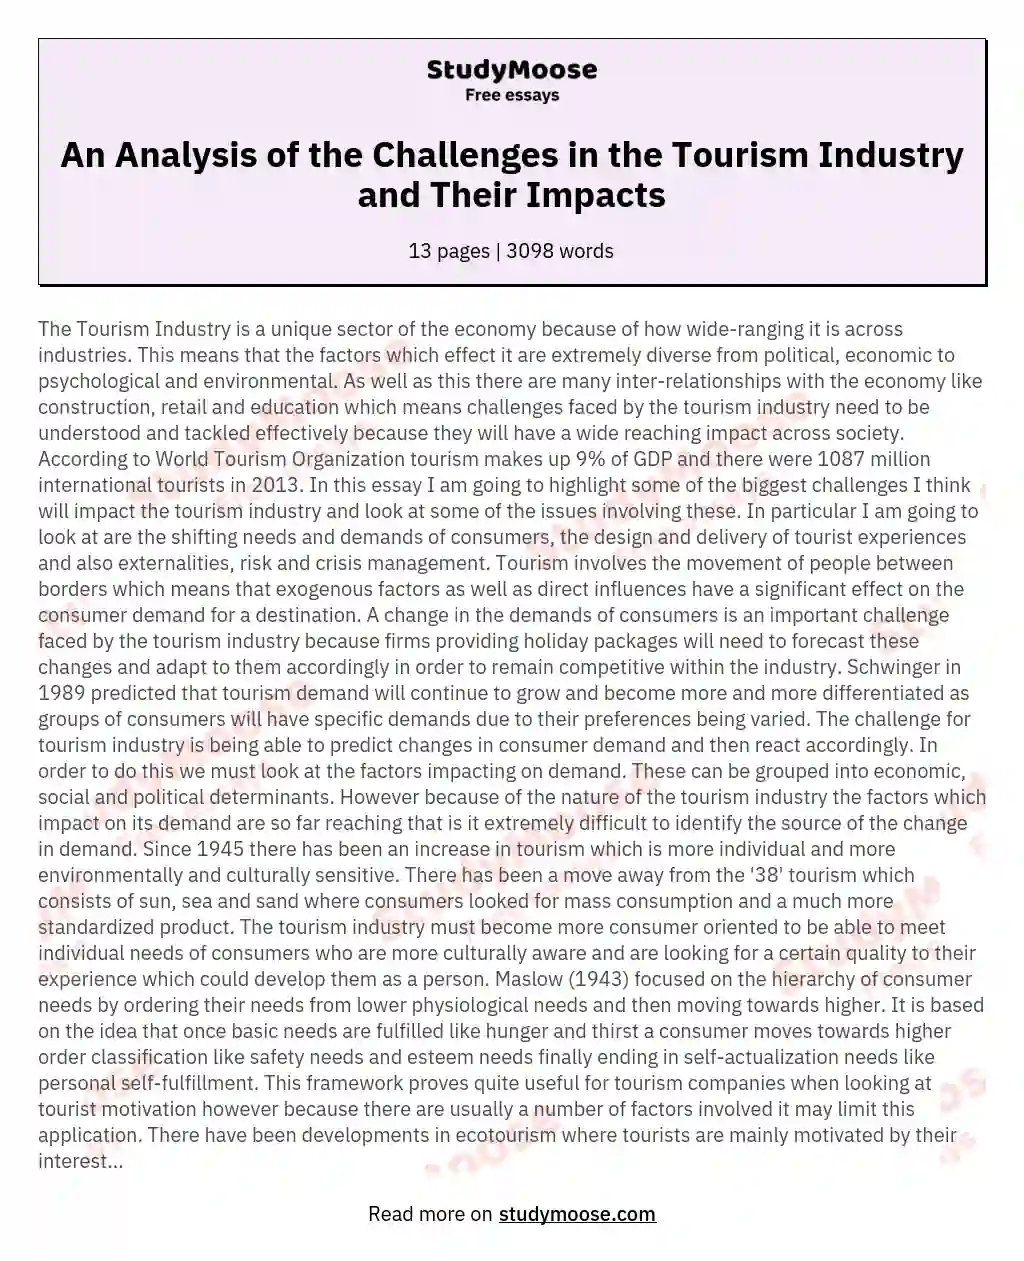 An Analysis of the Challenges in the Tourism Industry and Their Impacts essay